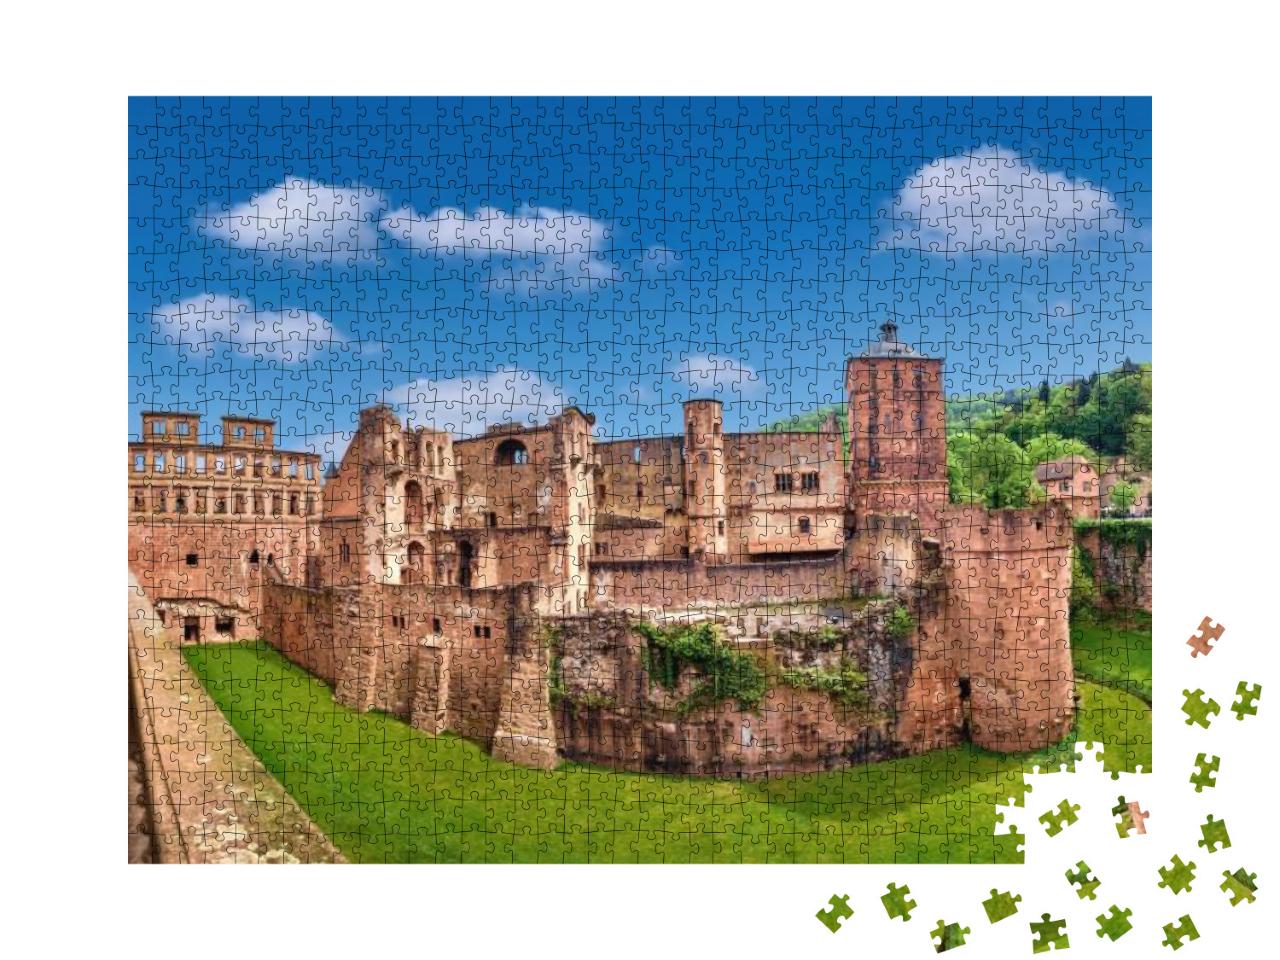 Ruins of Heidelberg Castle Heidelberger Schloss in Spring... Jigsaw Puzzle with 1000 pieces